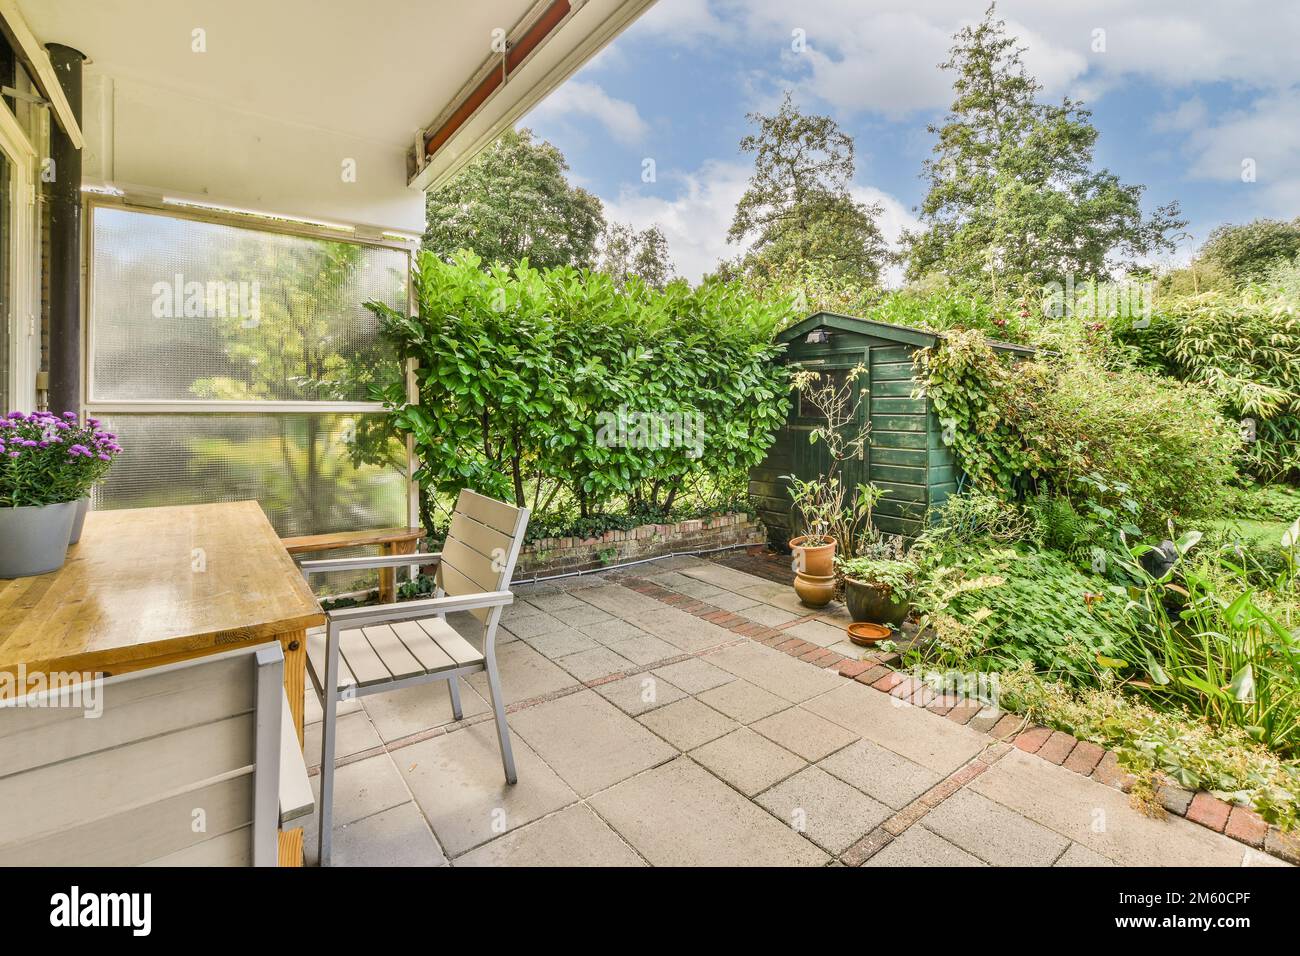 an outside area with some plants and pots on the table in front of the house, looking out to the garden Stock Photo